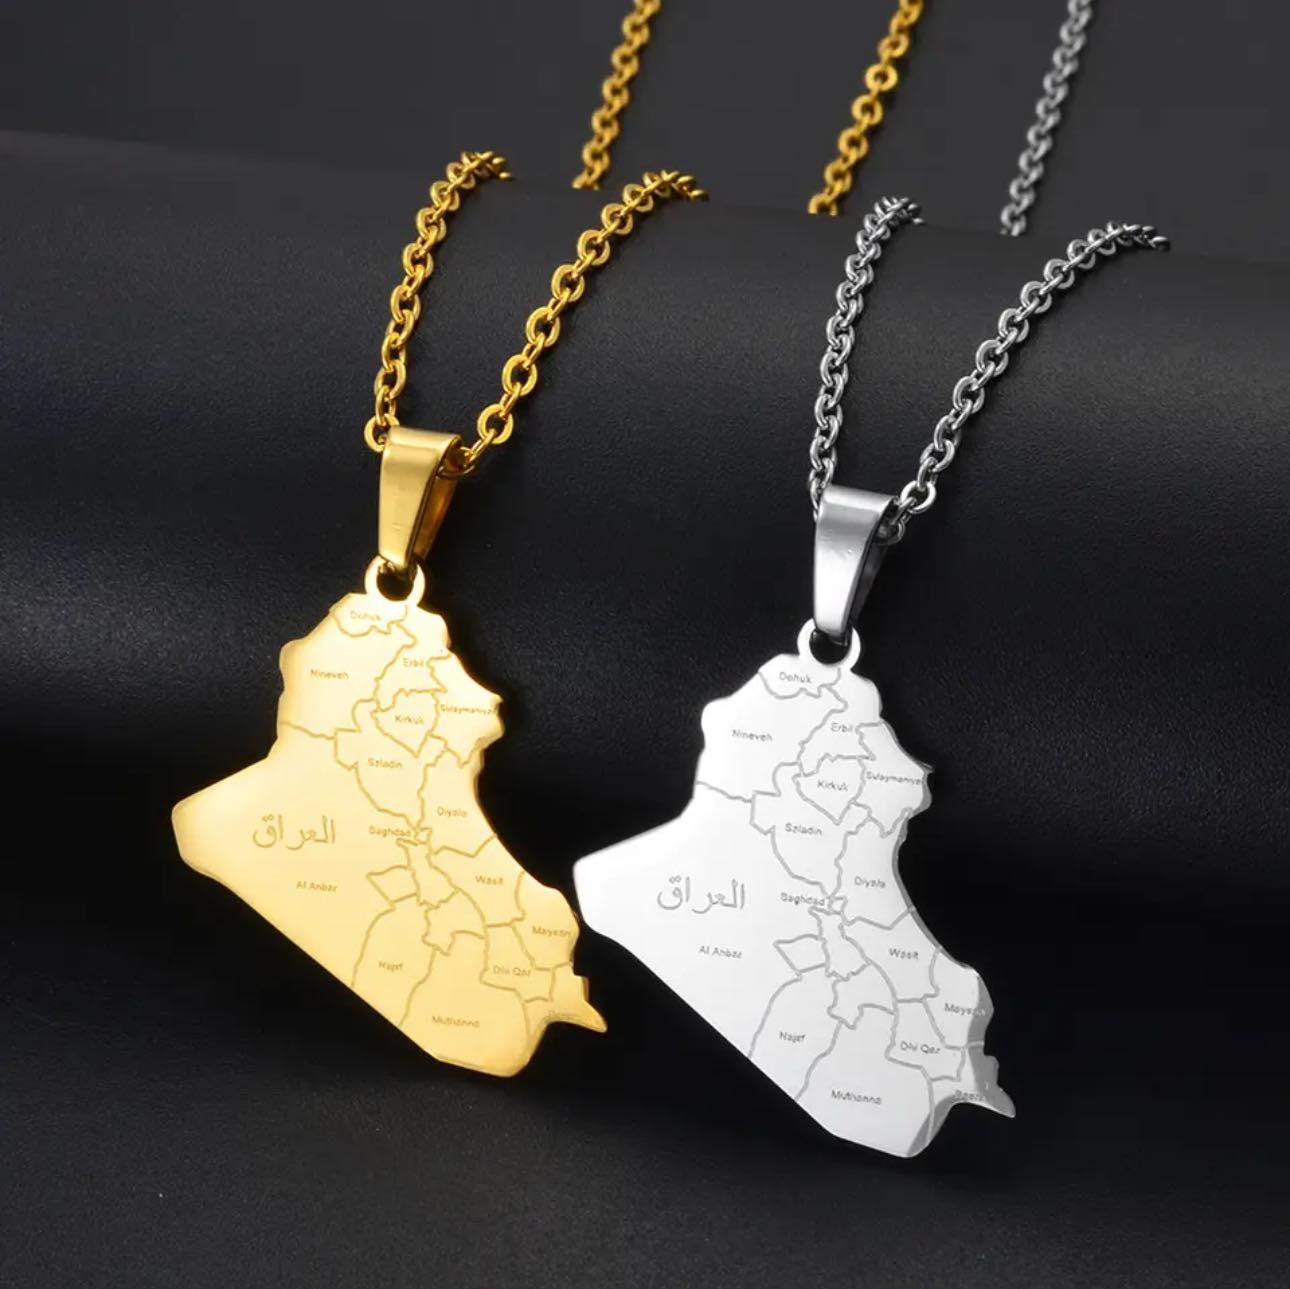 Iraq Map & Cities Necklace